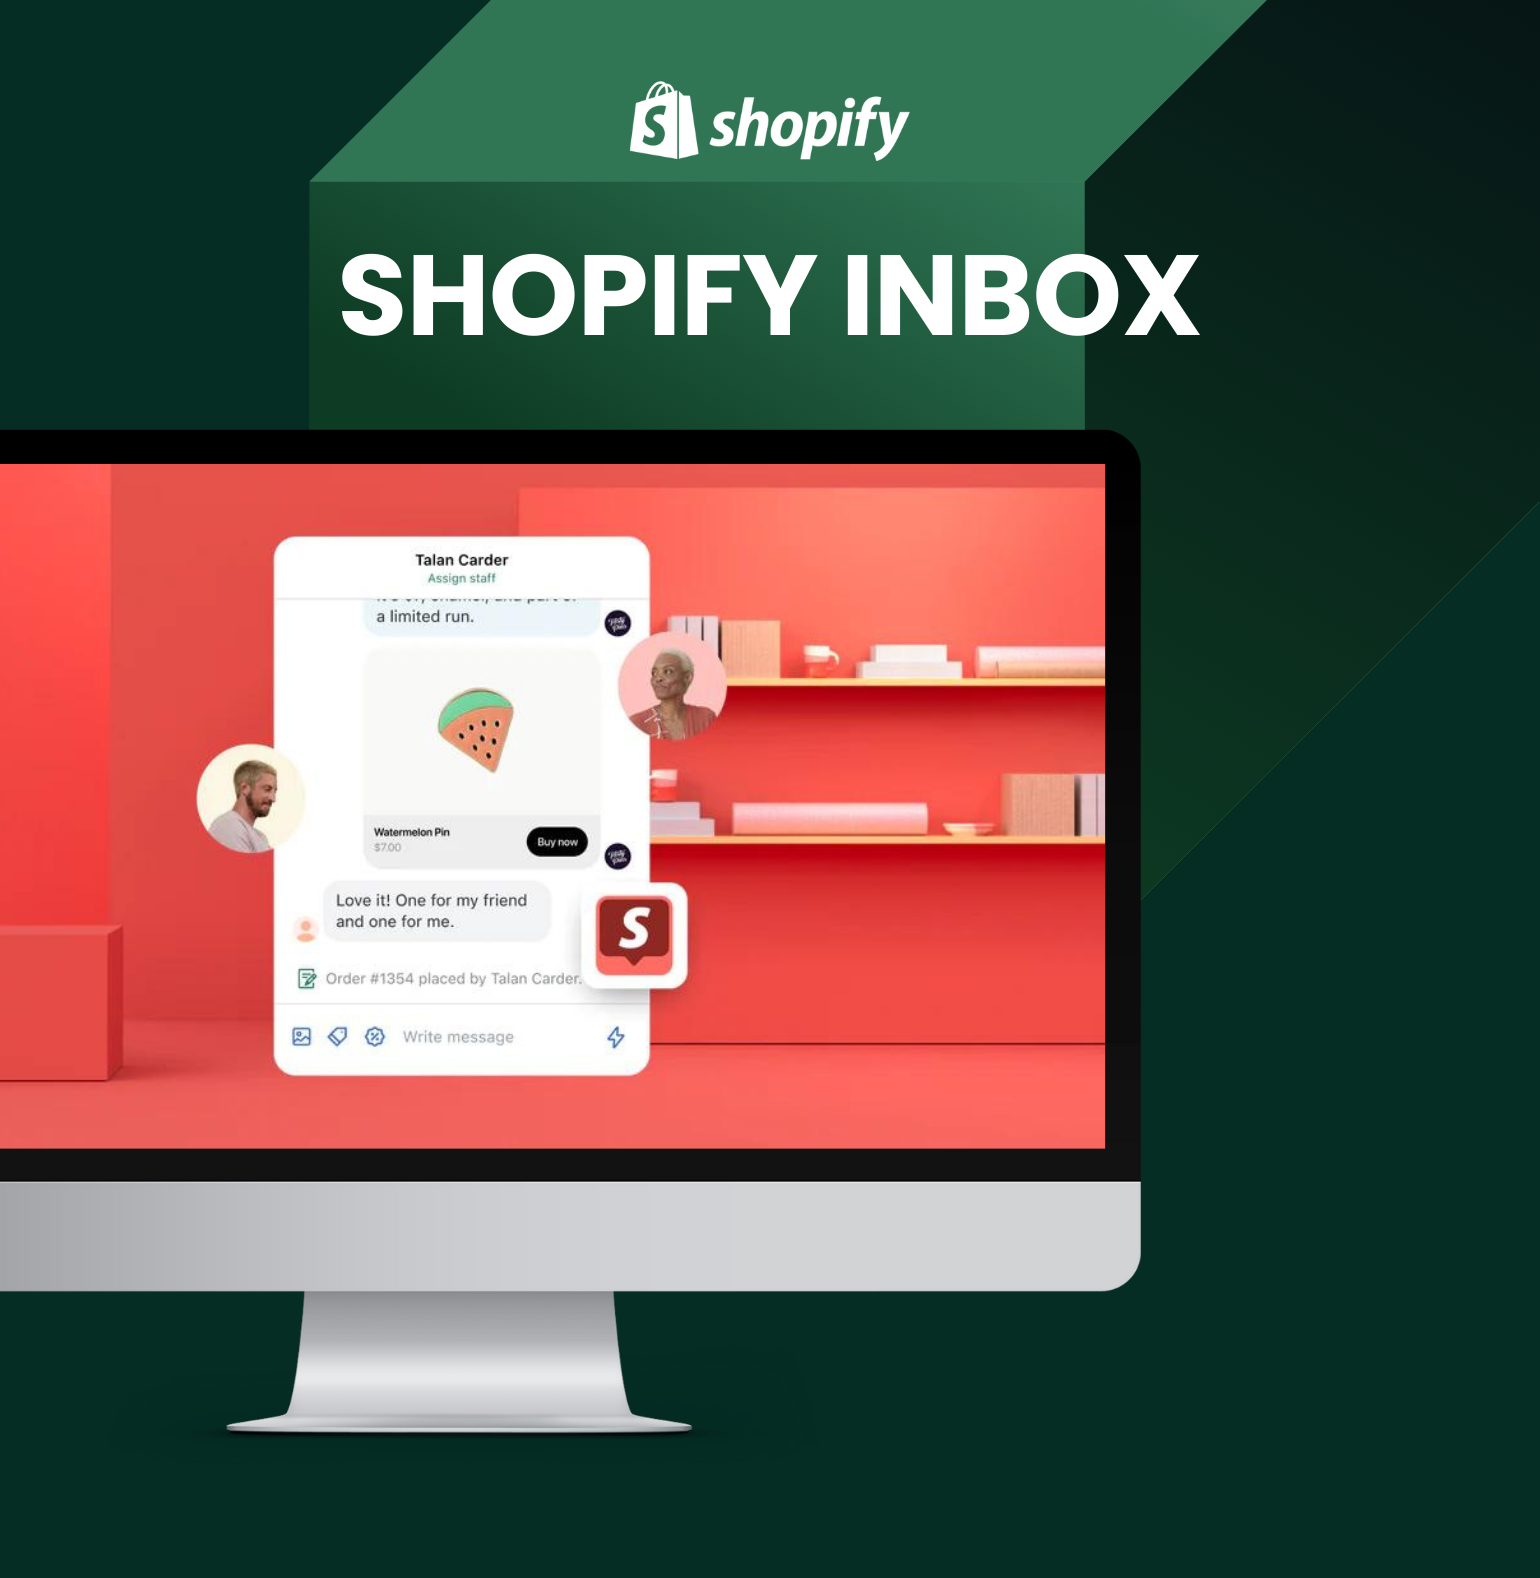 Shopify Inbox - Engage Shoppers and Boost Sales Through Chat - Shopify App Store